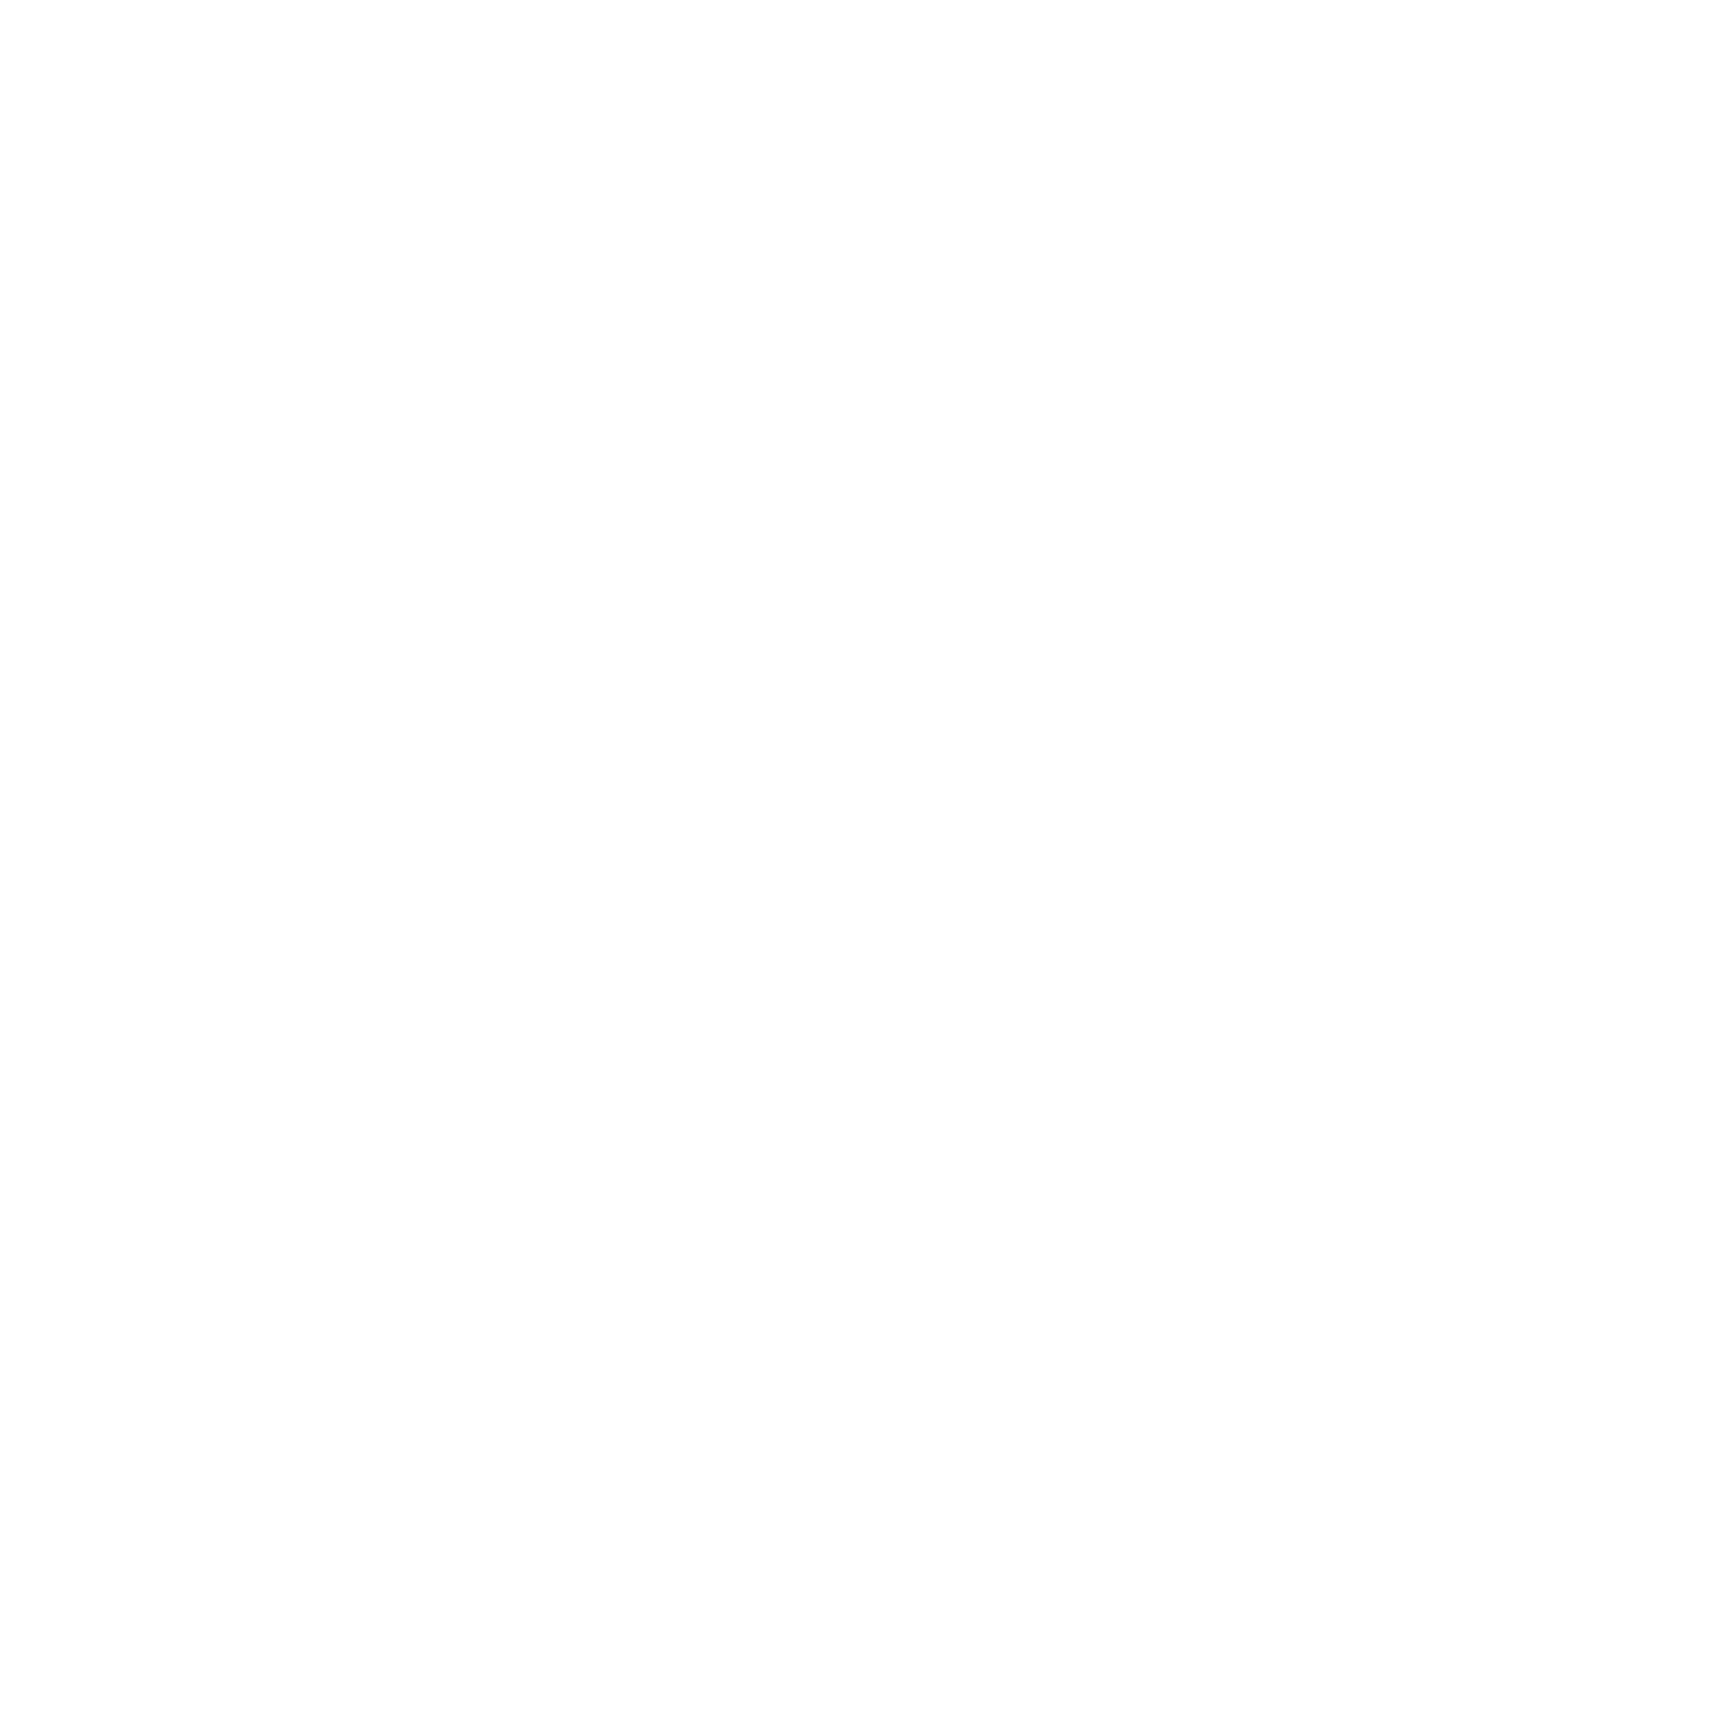 Compass Counseling